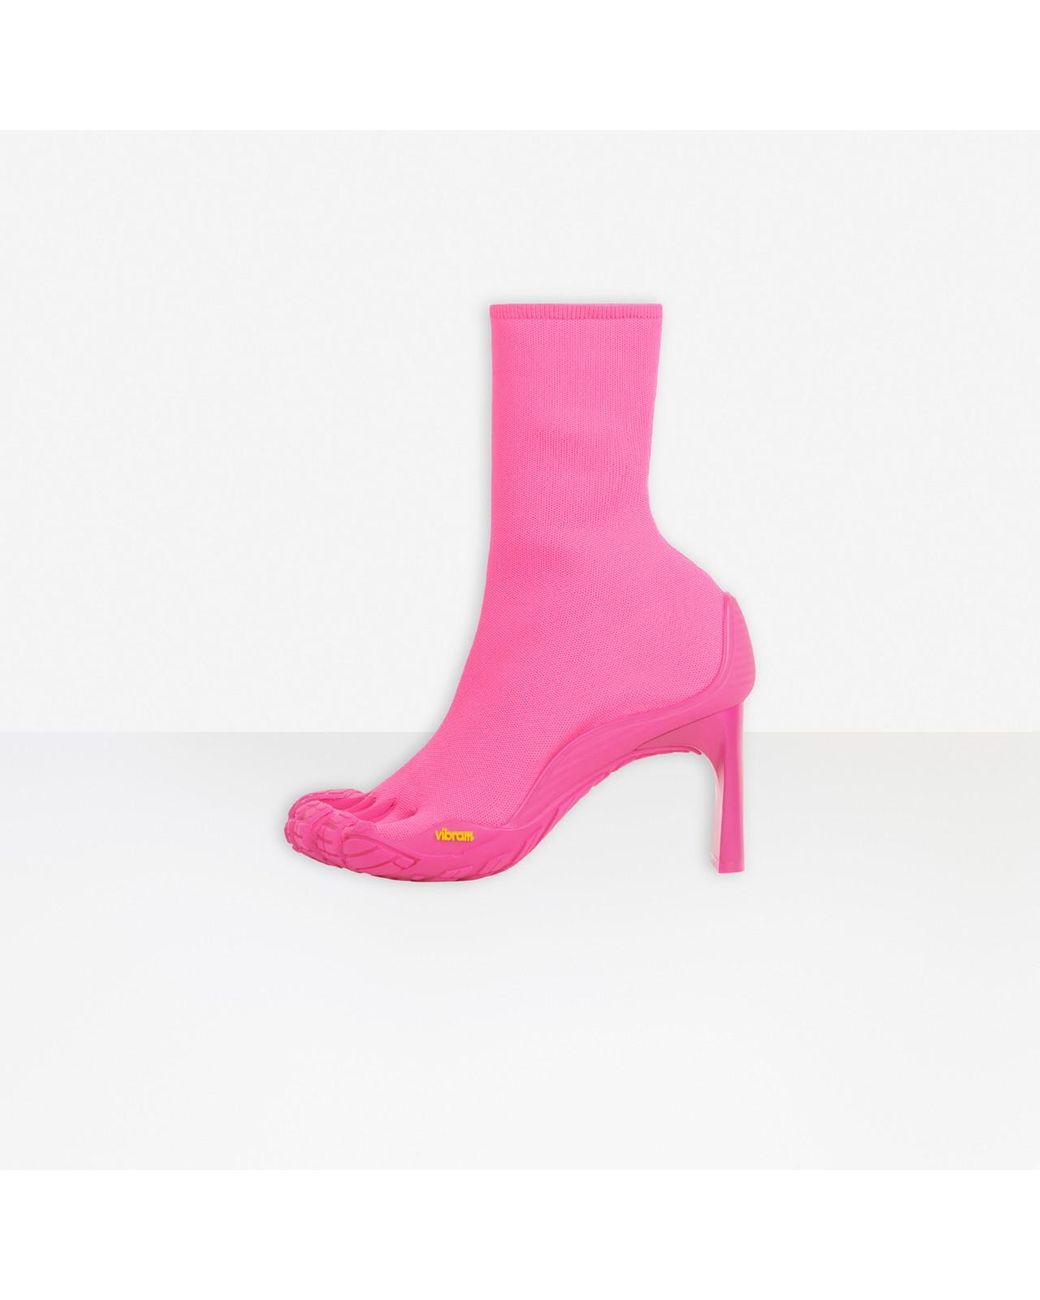 Balenciaga Knife Shark Leather Overtheknee Boots in Pink  Lyst